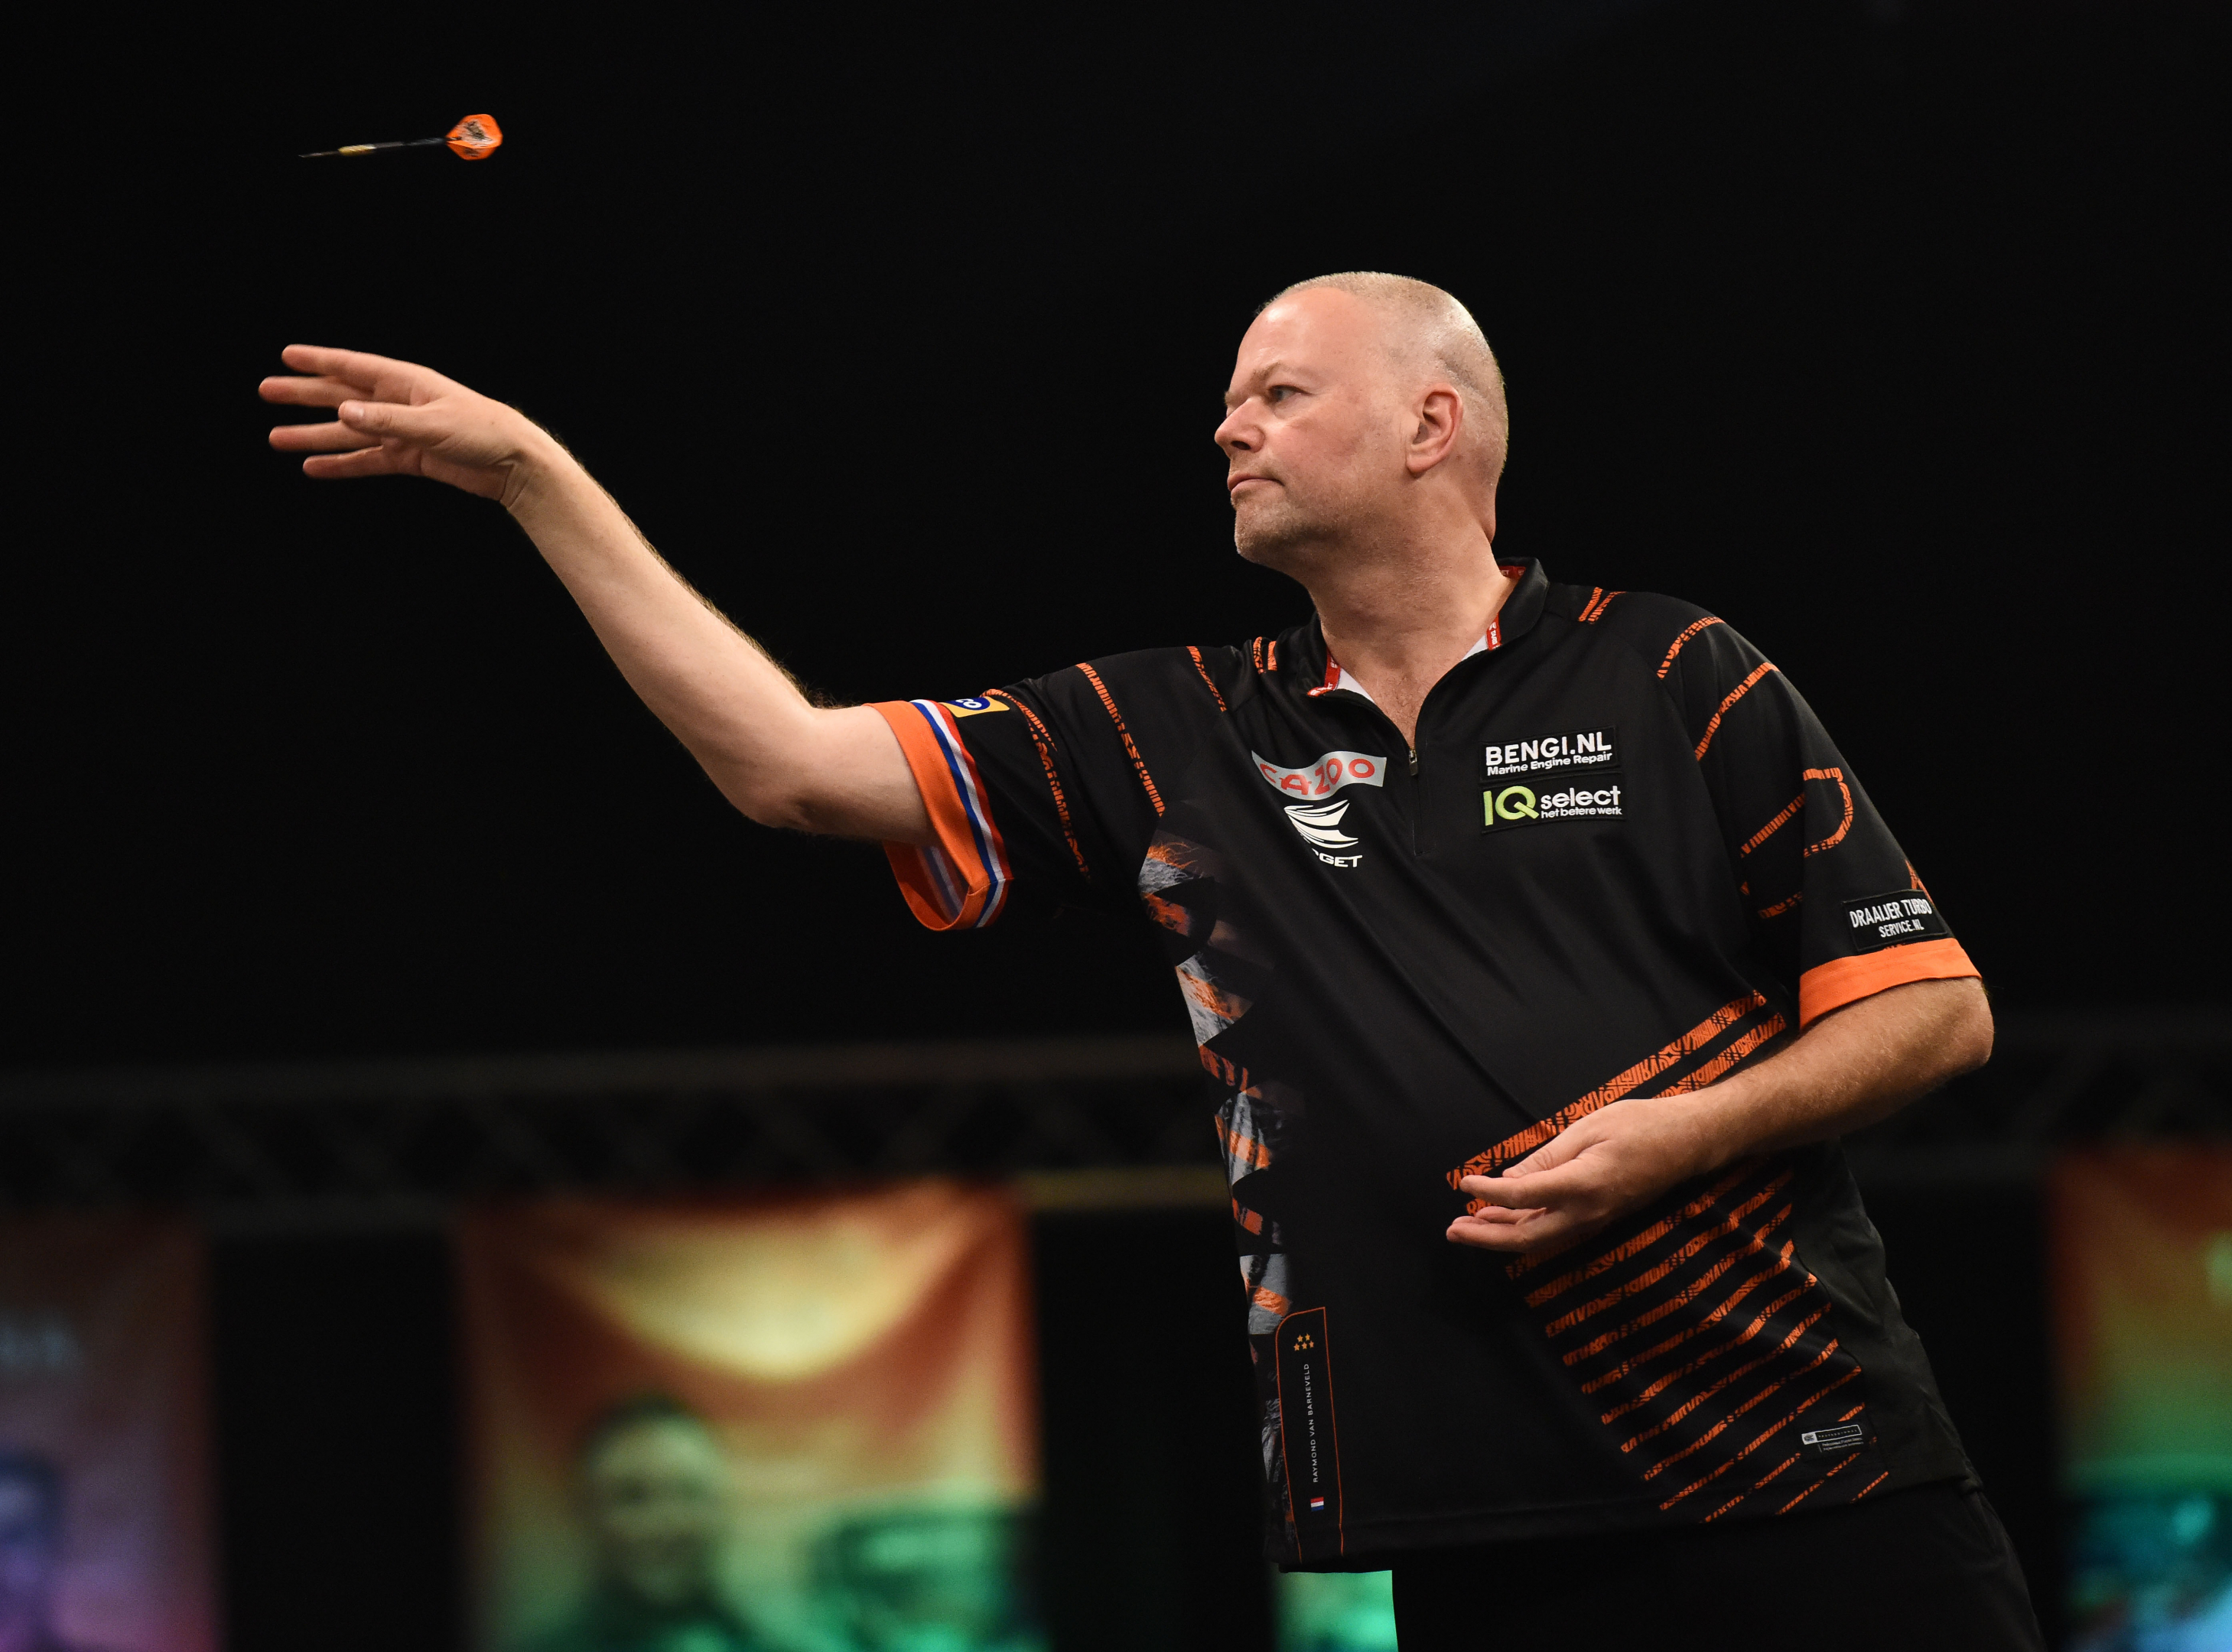 pdc uk open 2022 live